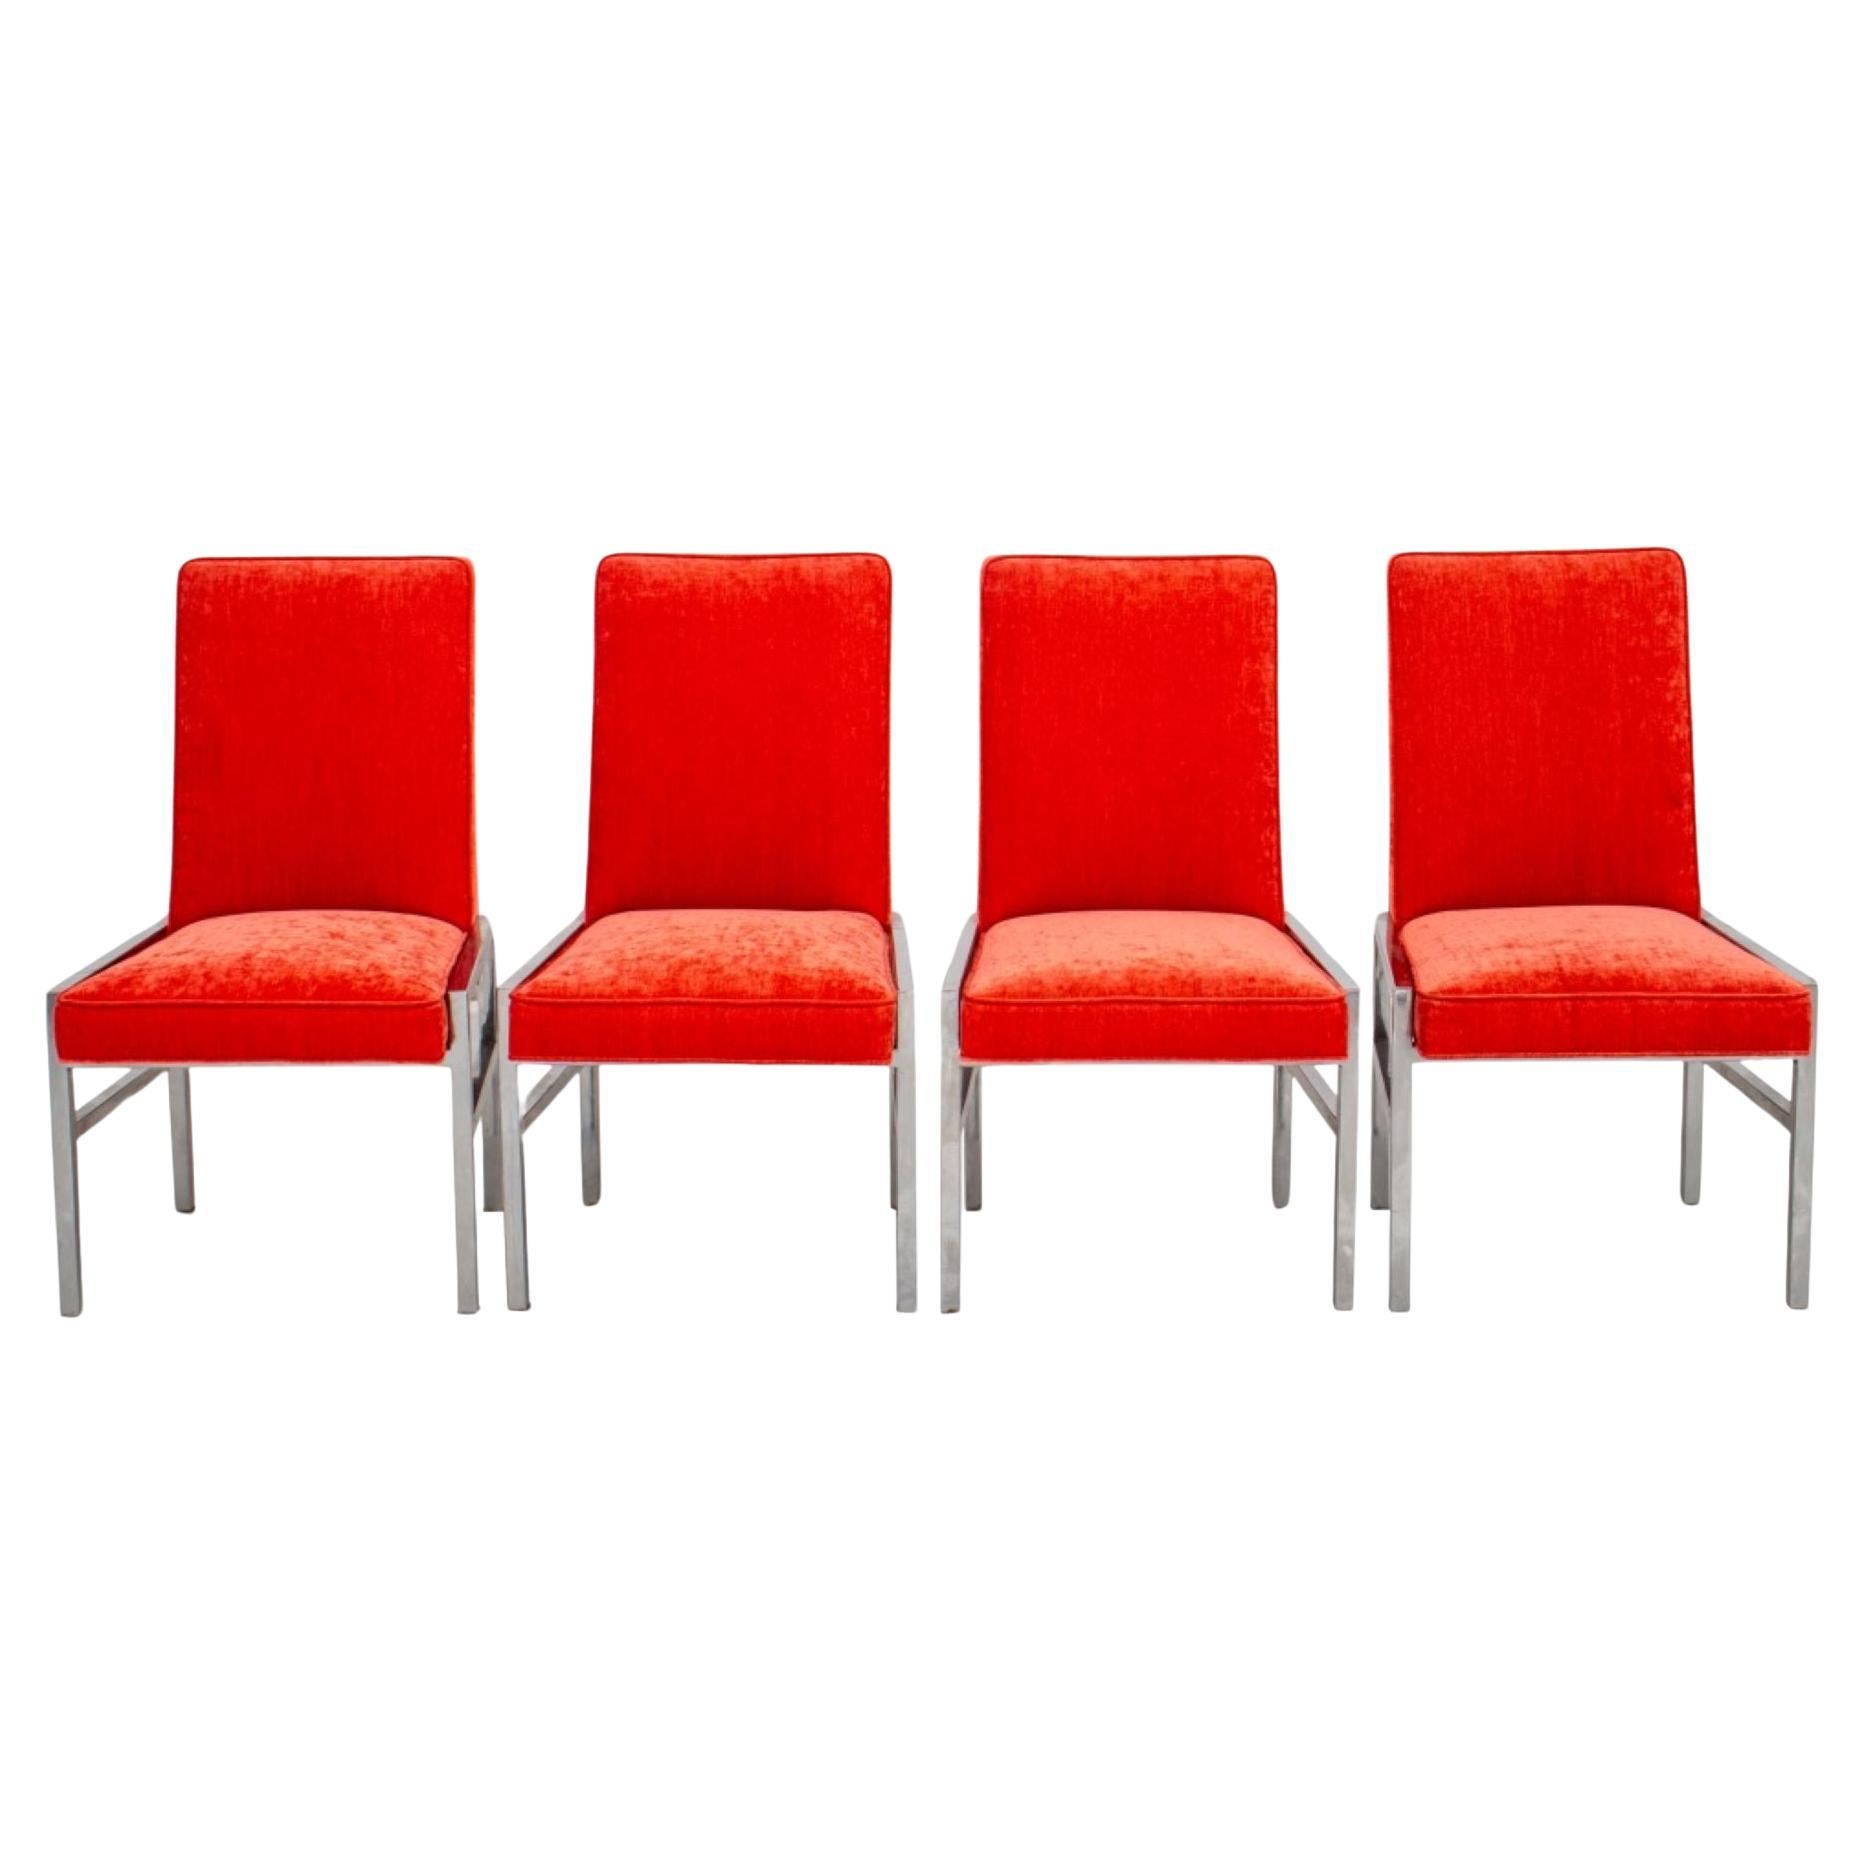 Mid-Century Modern Upholstered Chrome Chairs, 4 For Sale